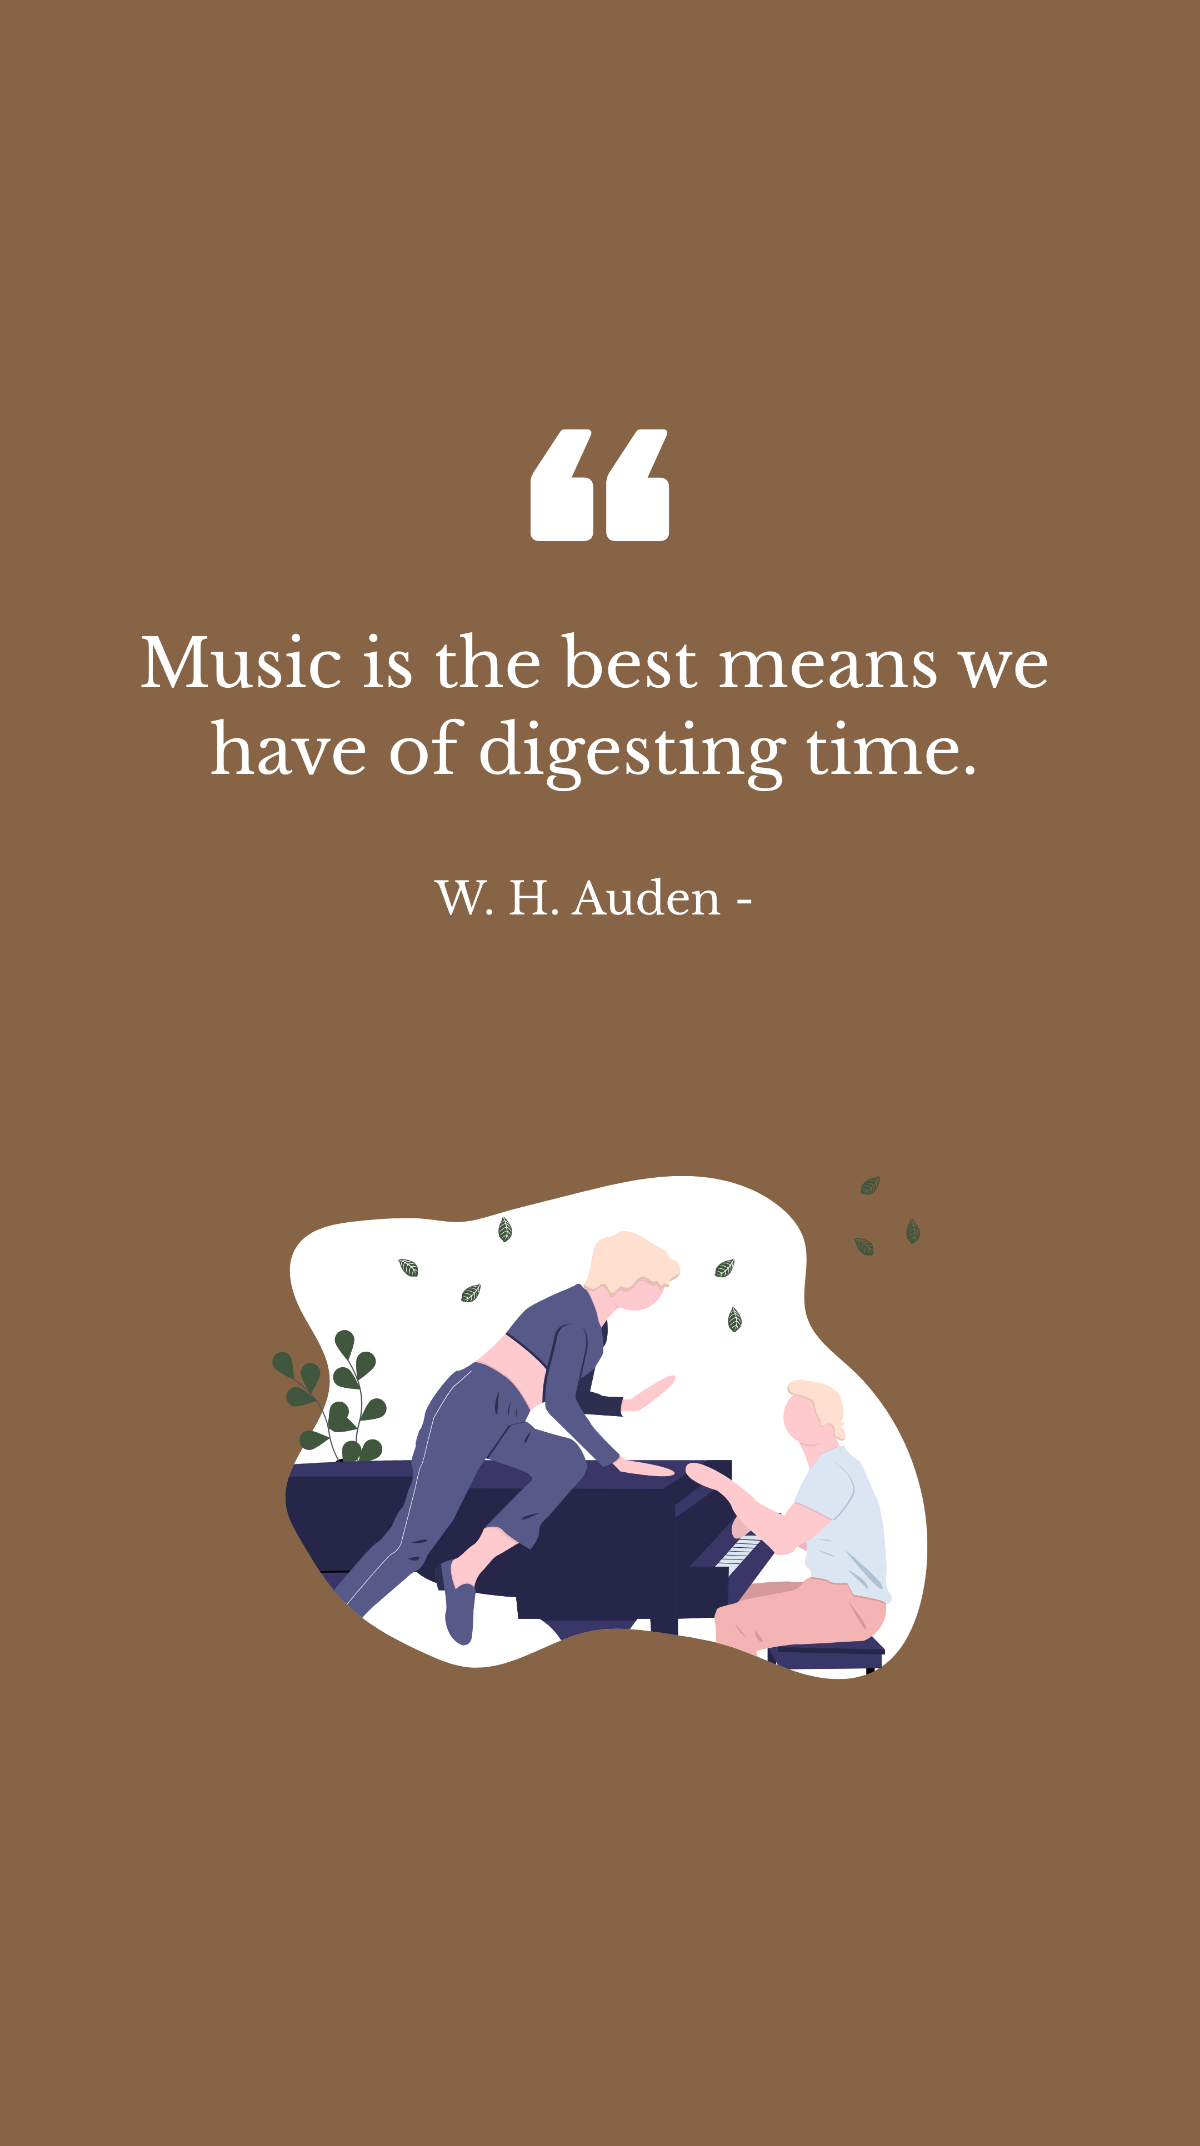 W. H. Auden - Music is the best means we have of digesting time. Template